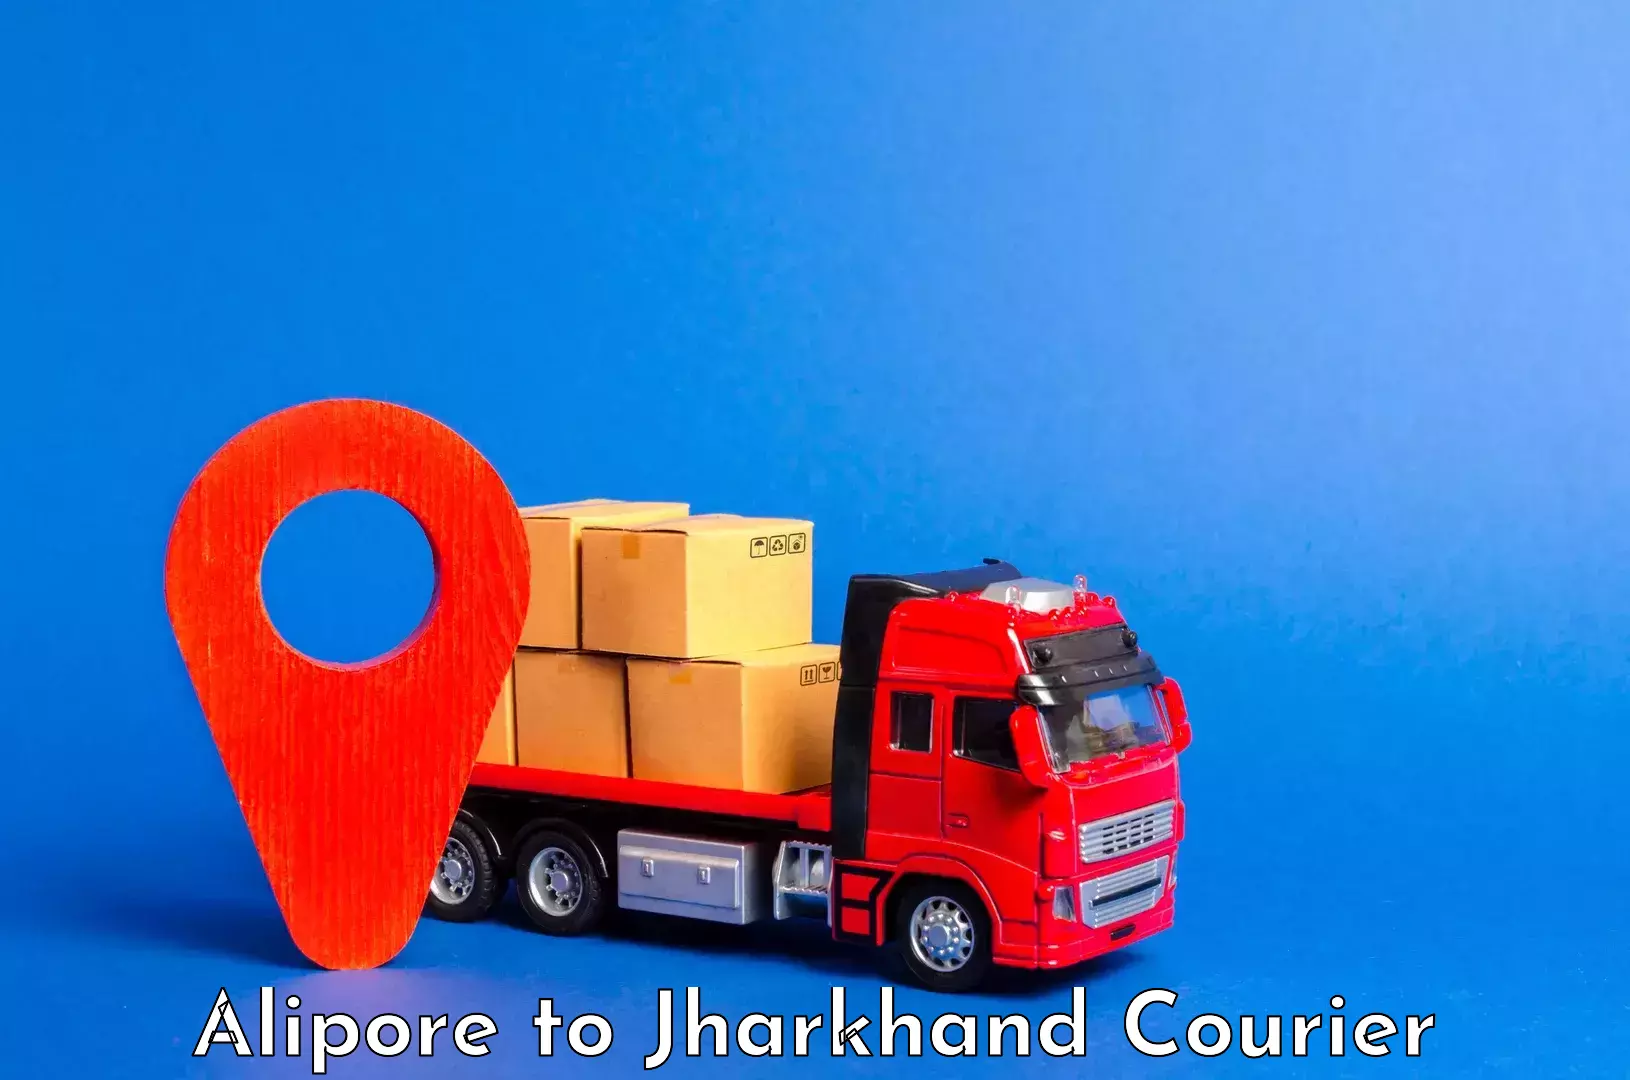 Luggage shipment processing Alipore to Jharkhand